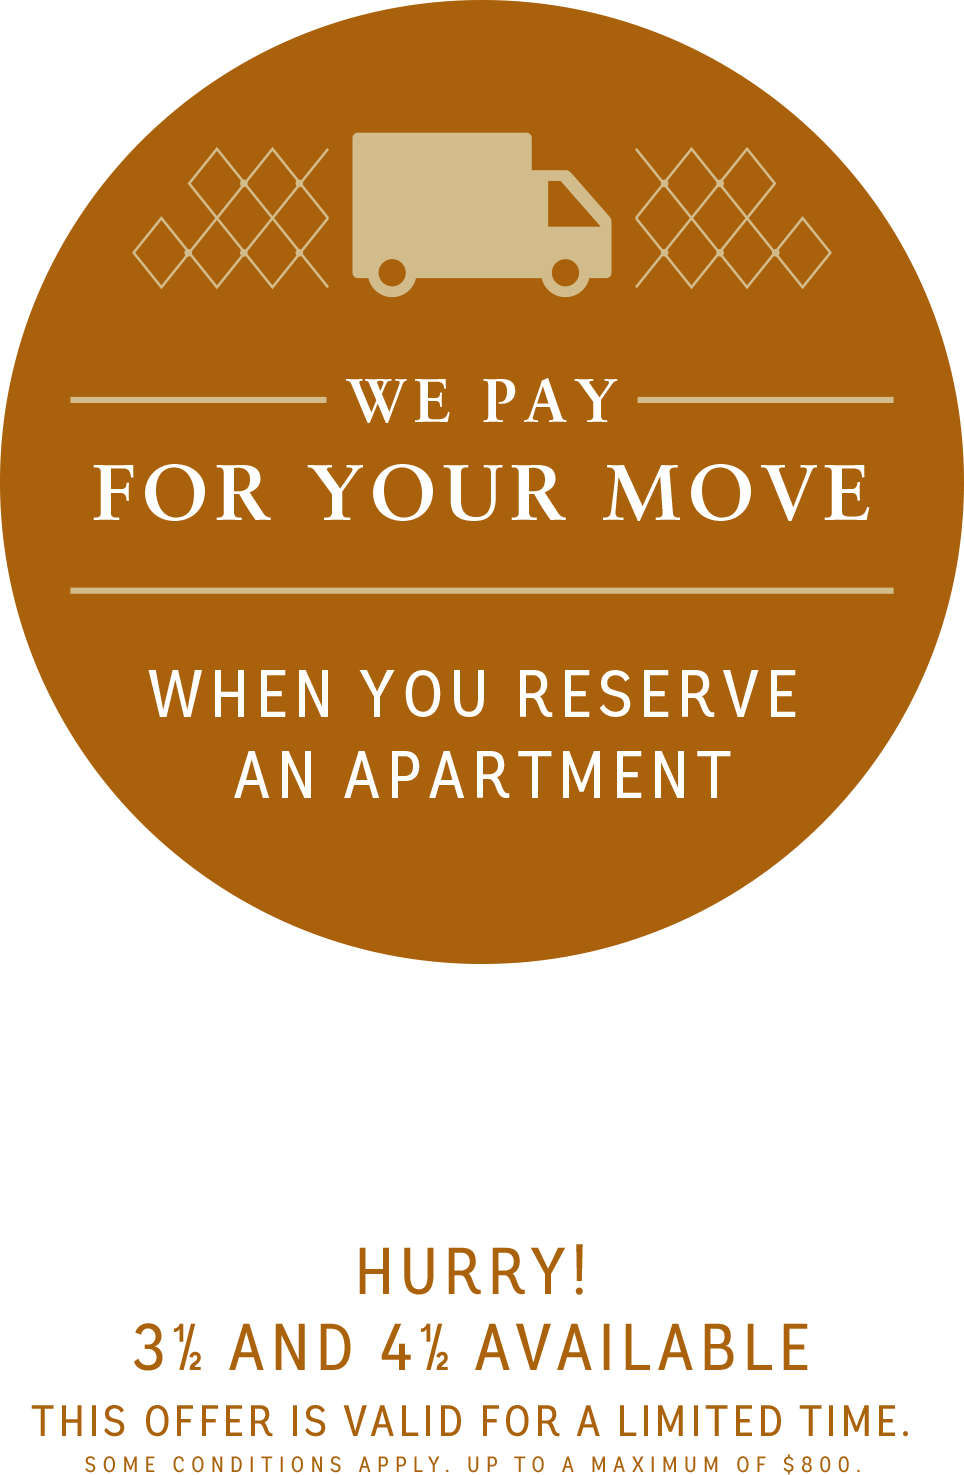 We pay for your move when you reserve a apartment - Limited time - Some conditions apply - Maximum to 800$